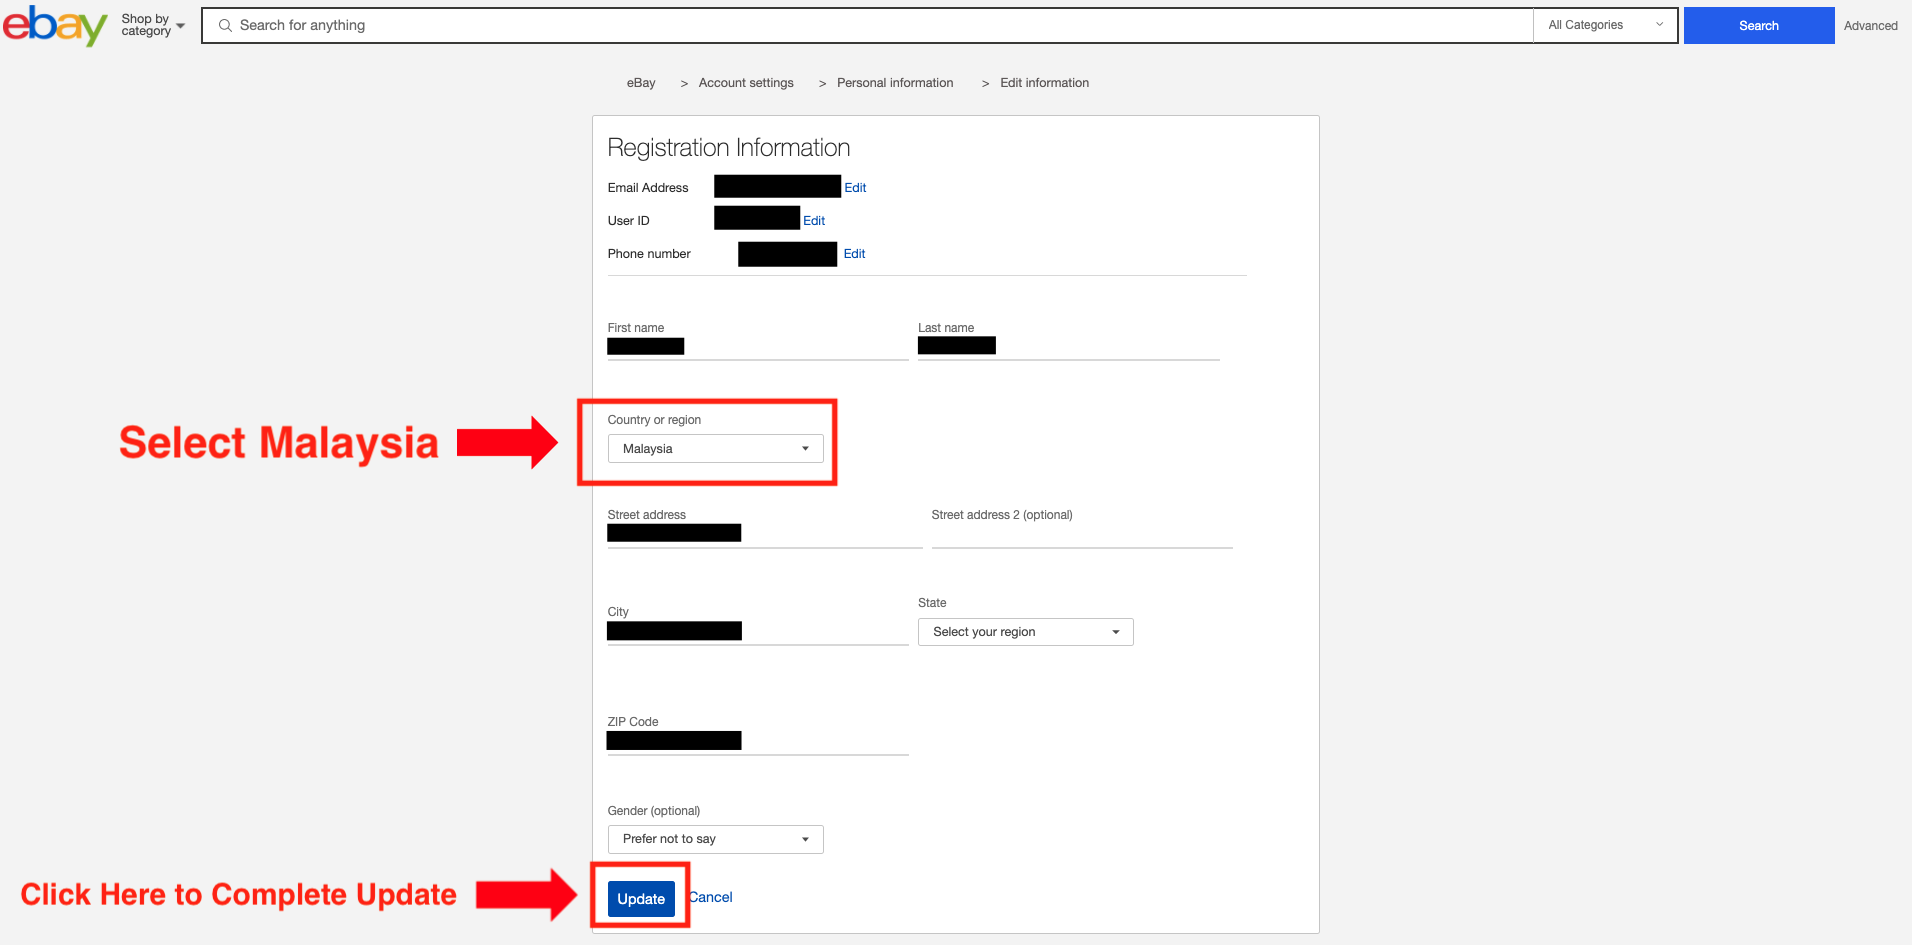 7. Fill in your info and change "Country or region" to Malaysia. After completing the form, click "Update". 